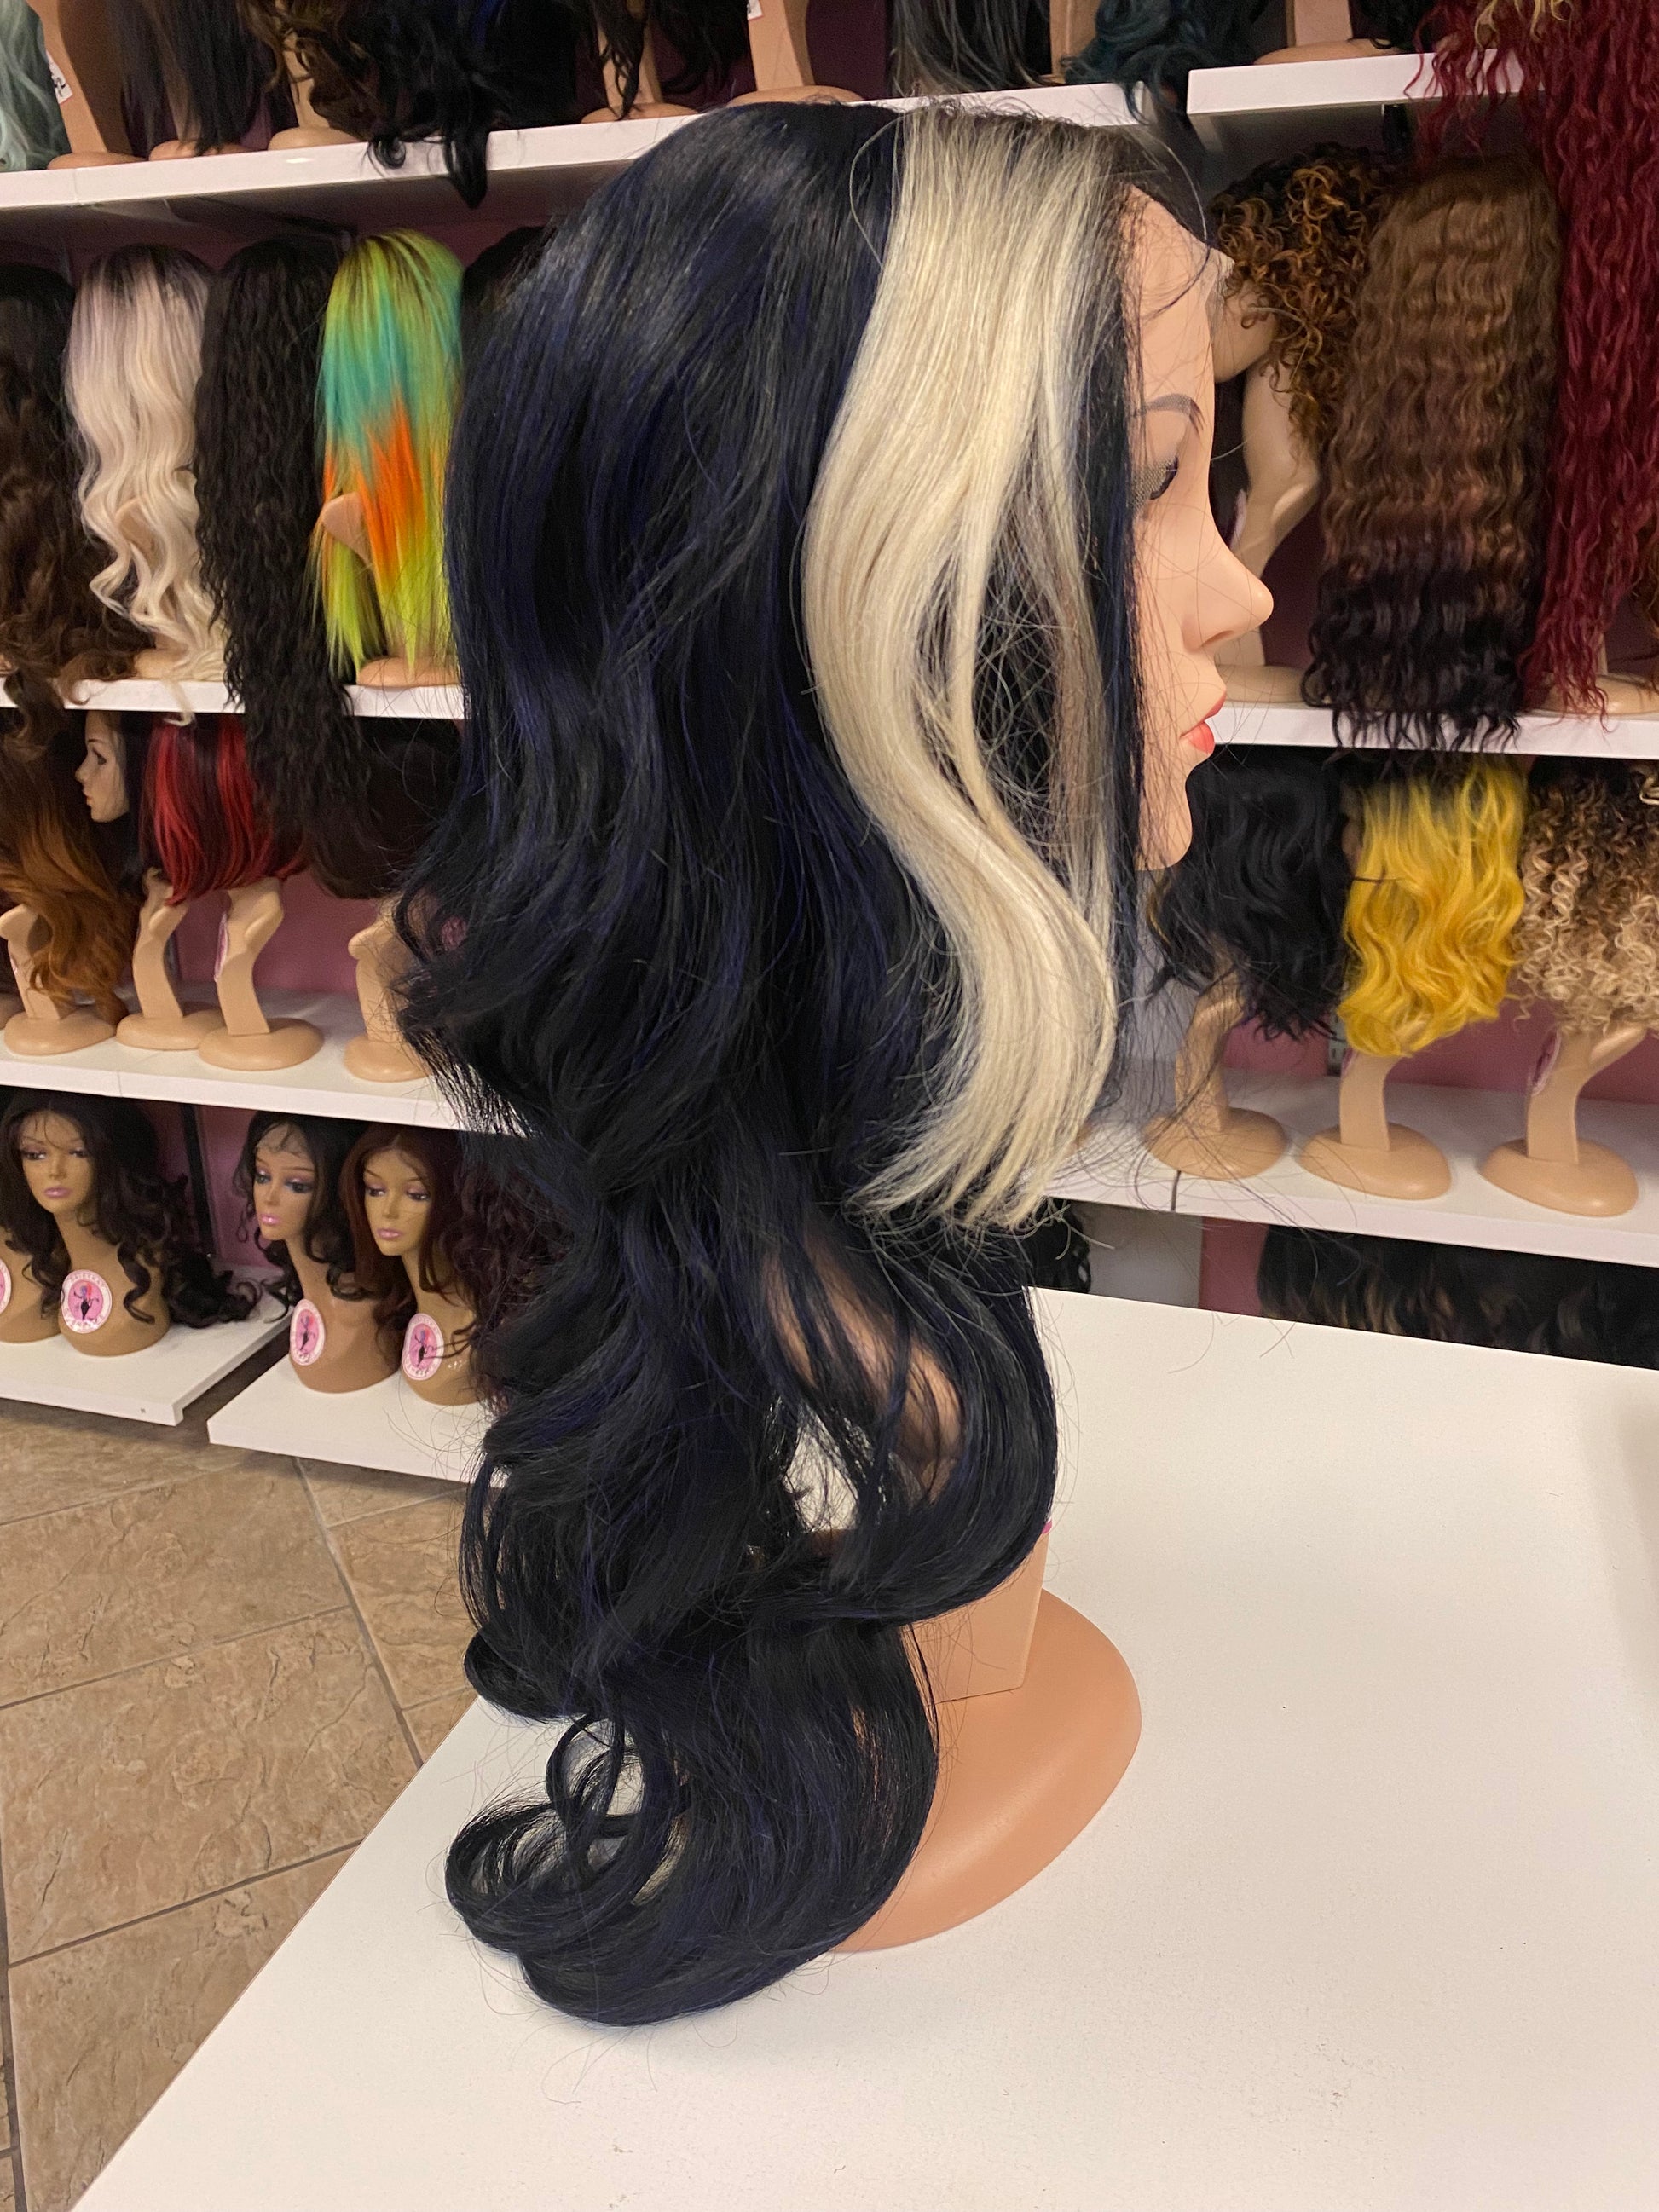 210 Mona - Middle Part Lace Front Wig - NAVY/1B/613 - DaizyKat Cosmetics 210 Mona - Middle Part Lace Front Wig - NAVY/1B/613 DaizyKat Cosmetics Wigs